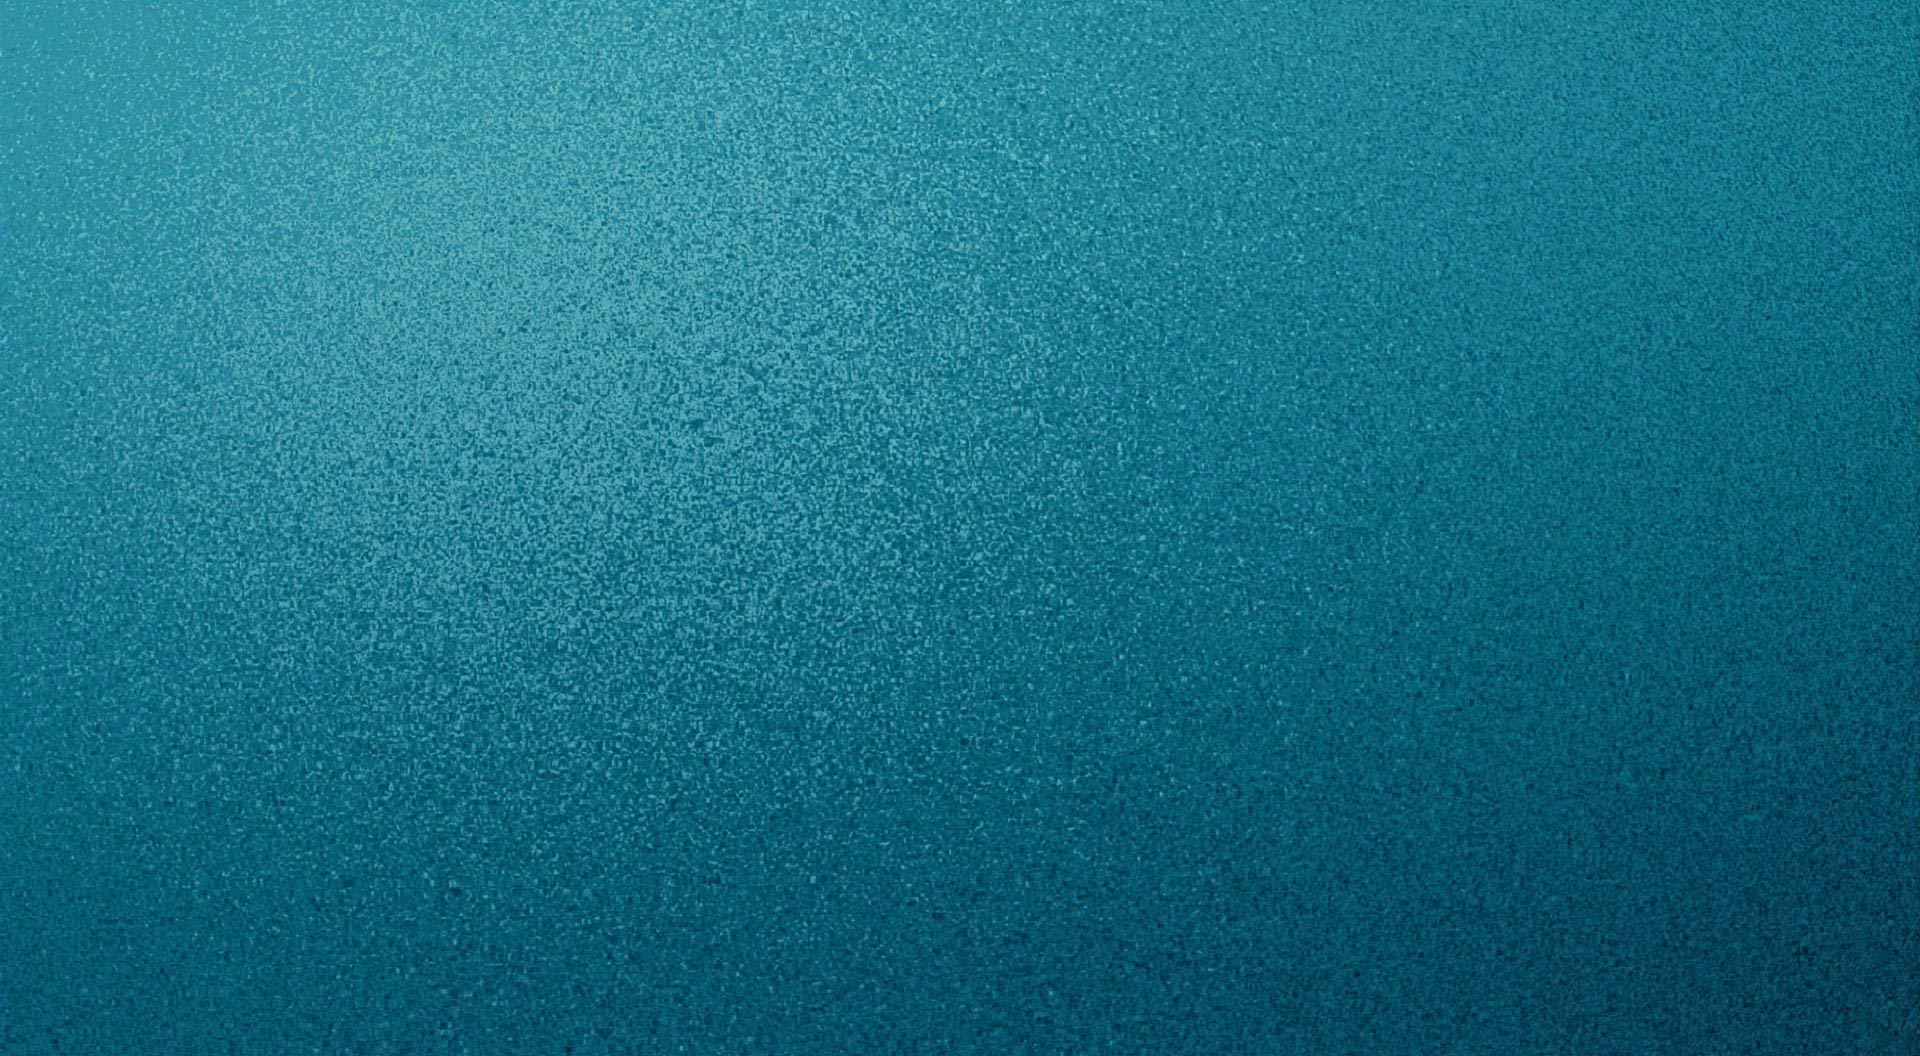 Download Texture Paper Texture Background, Free Image Chainimage